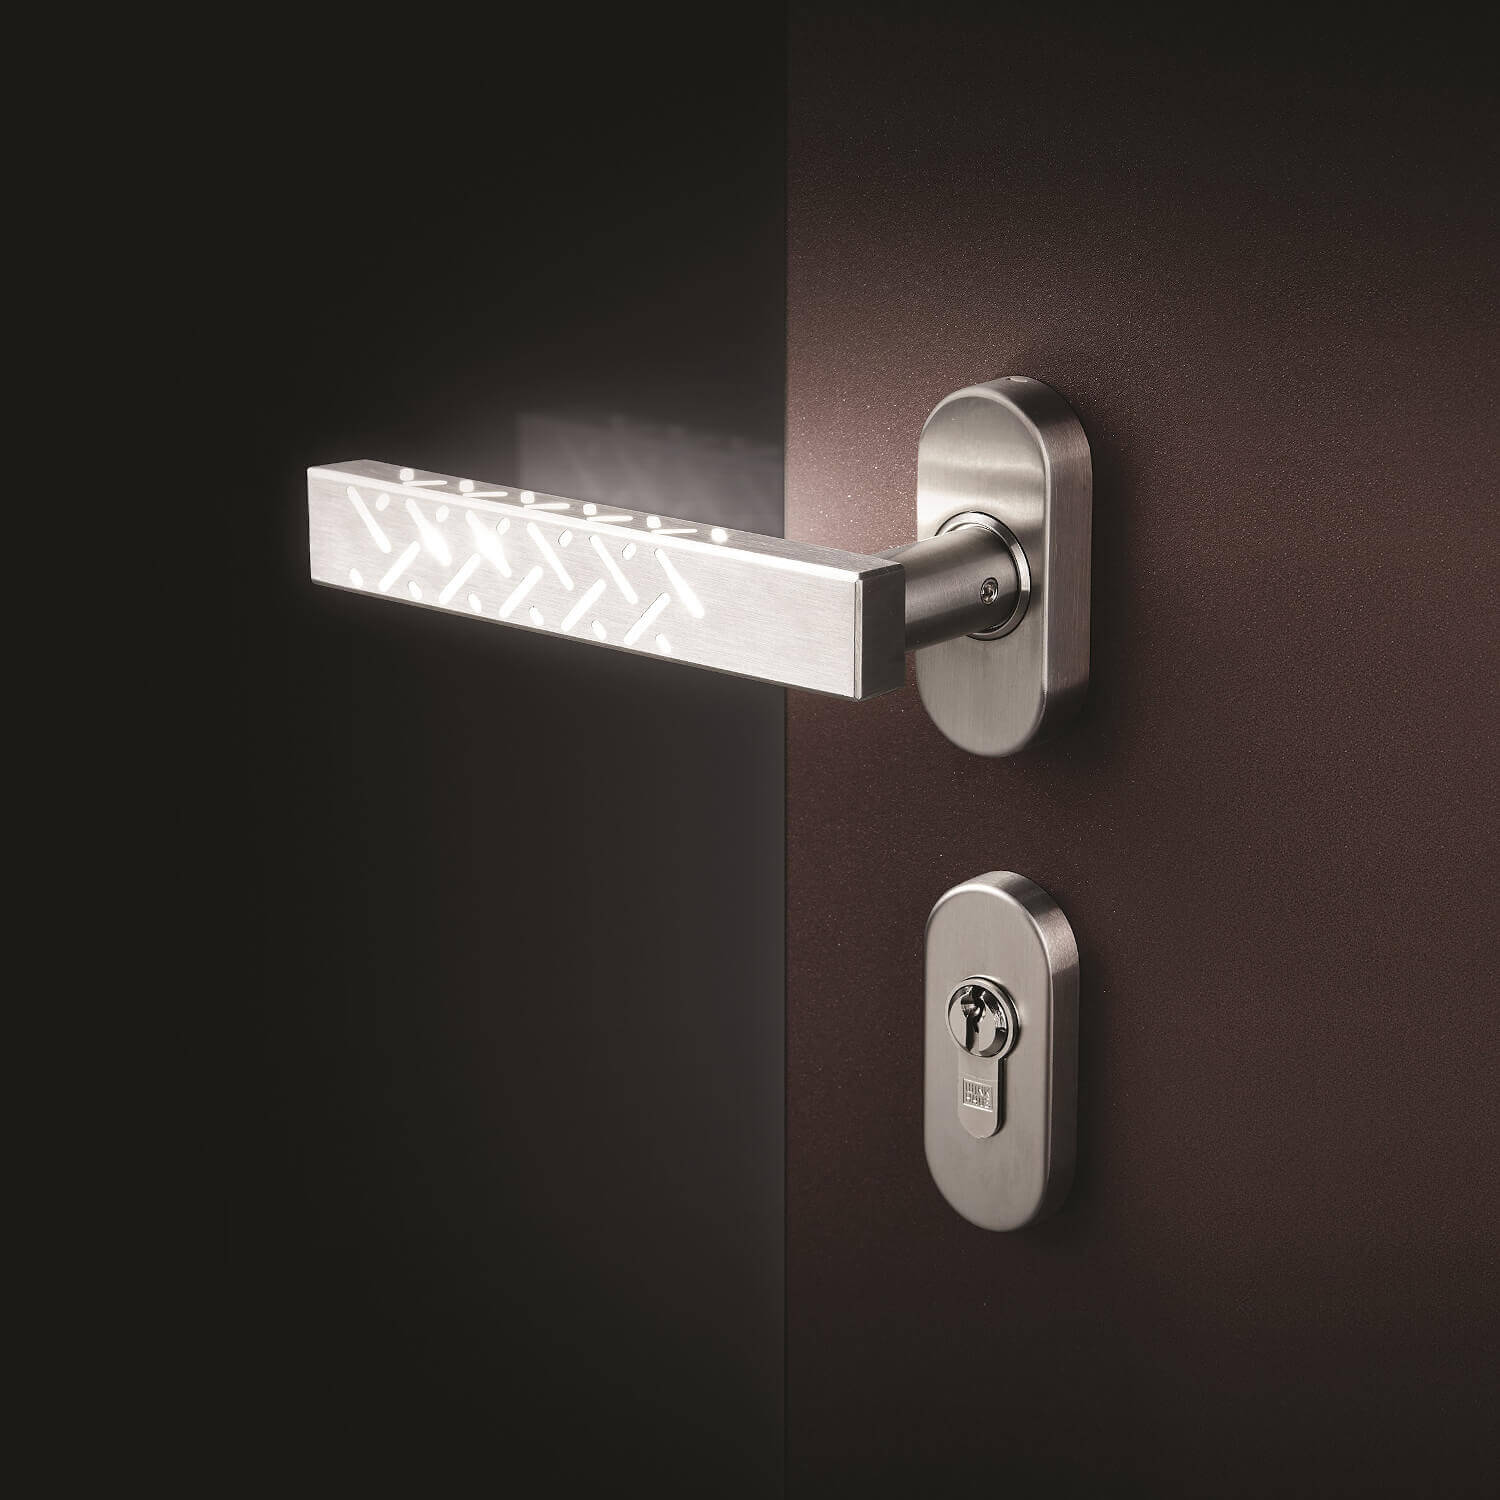 Square inside handle made of stainless steel with illuminated finish